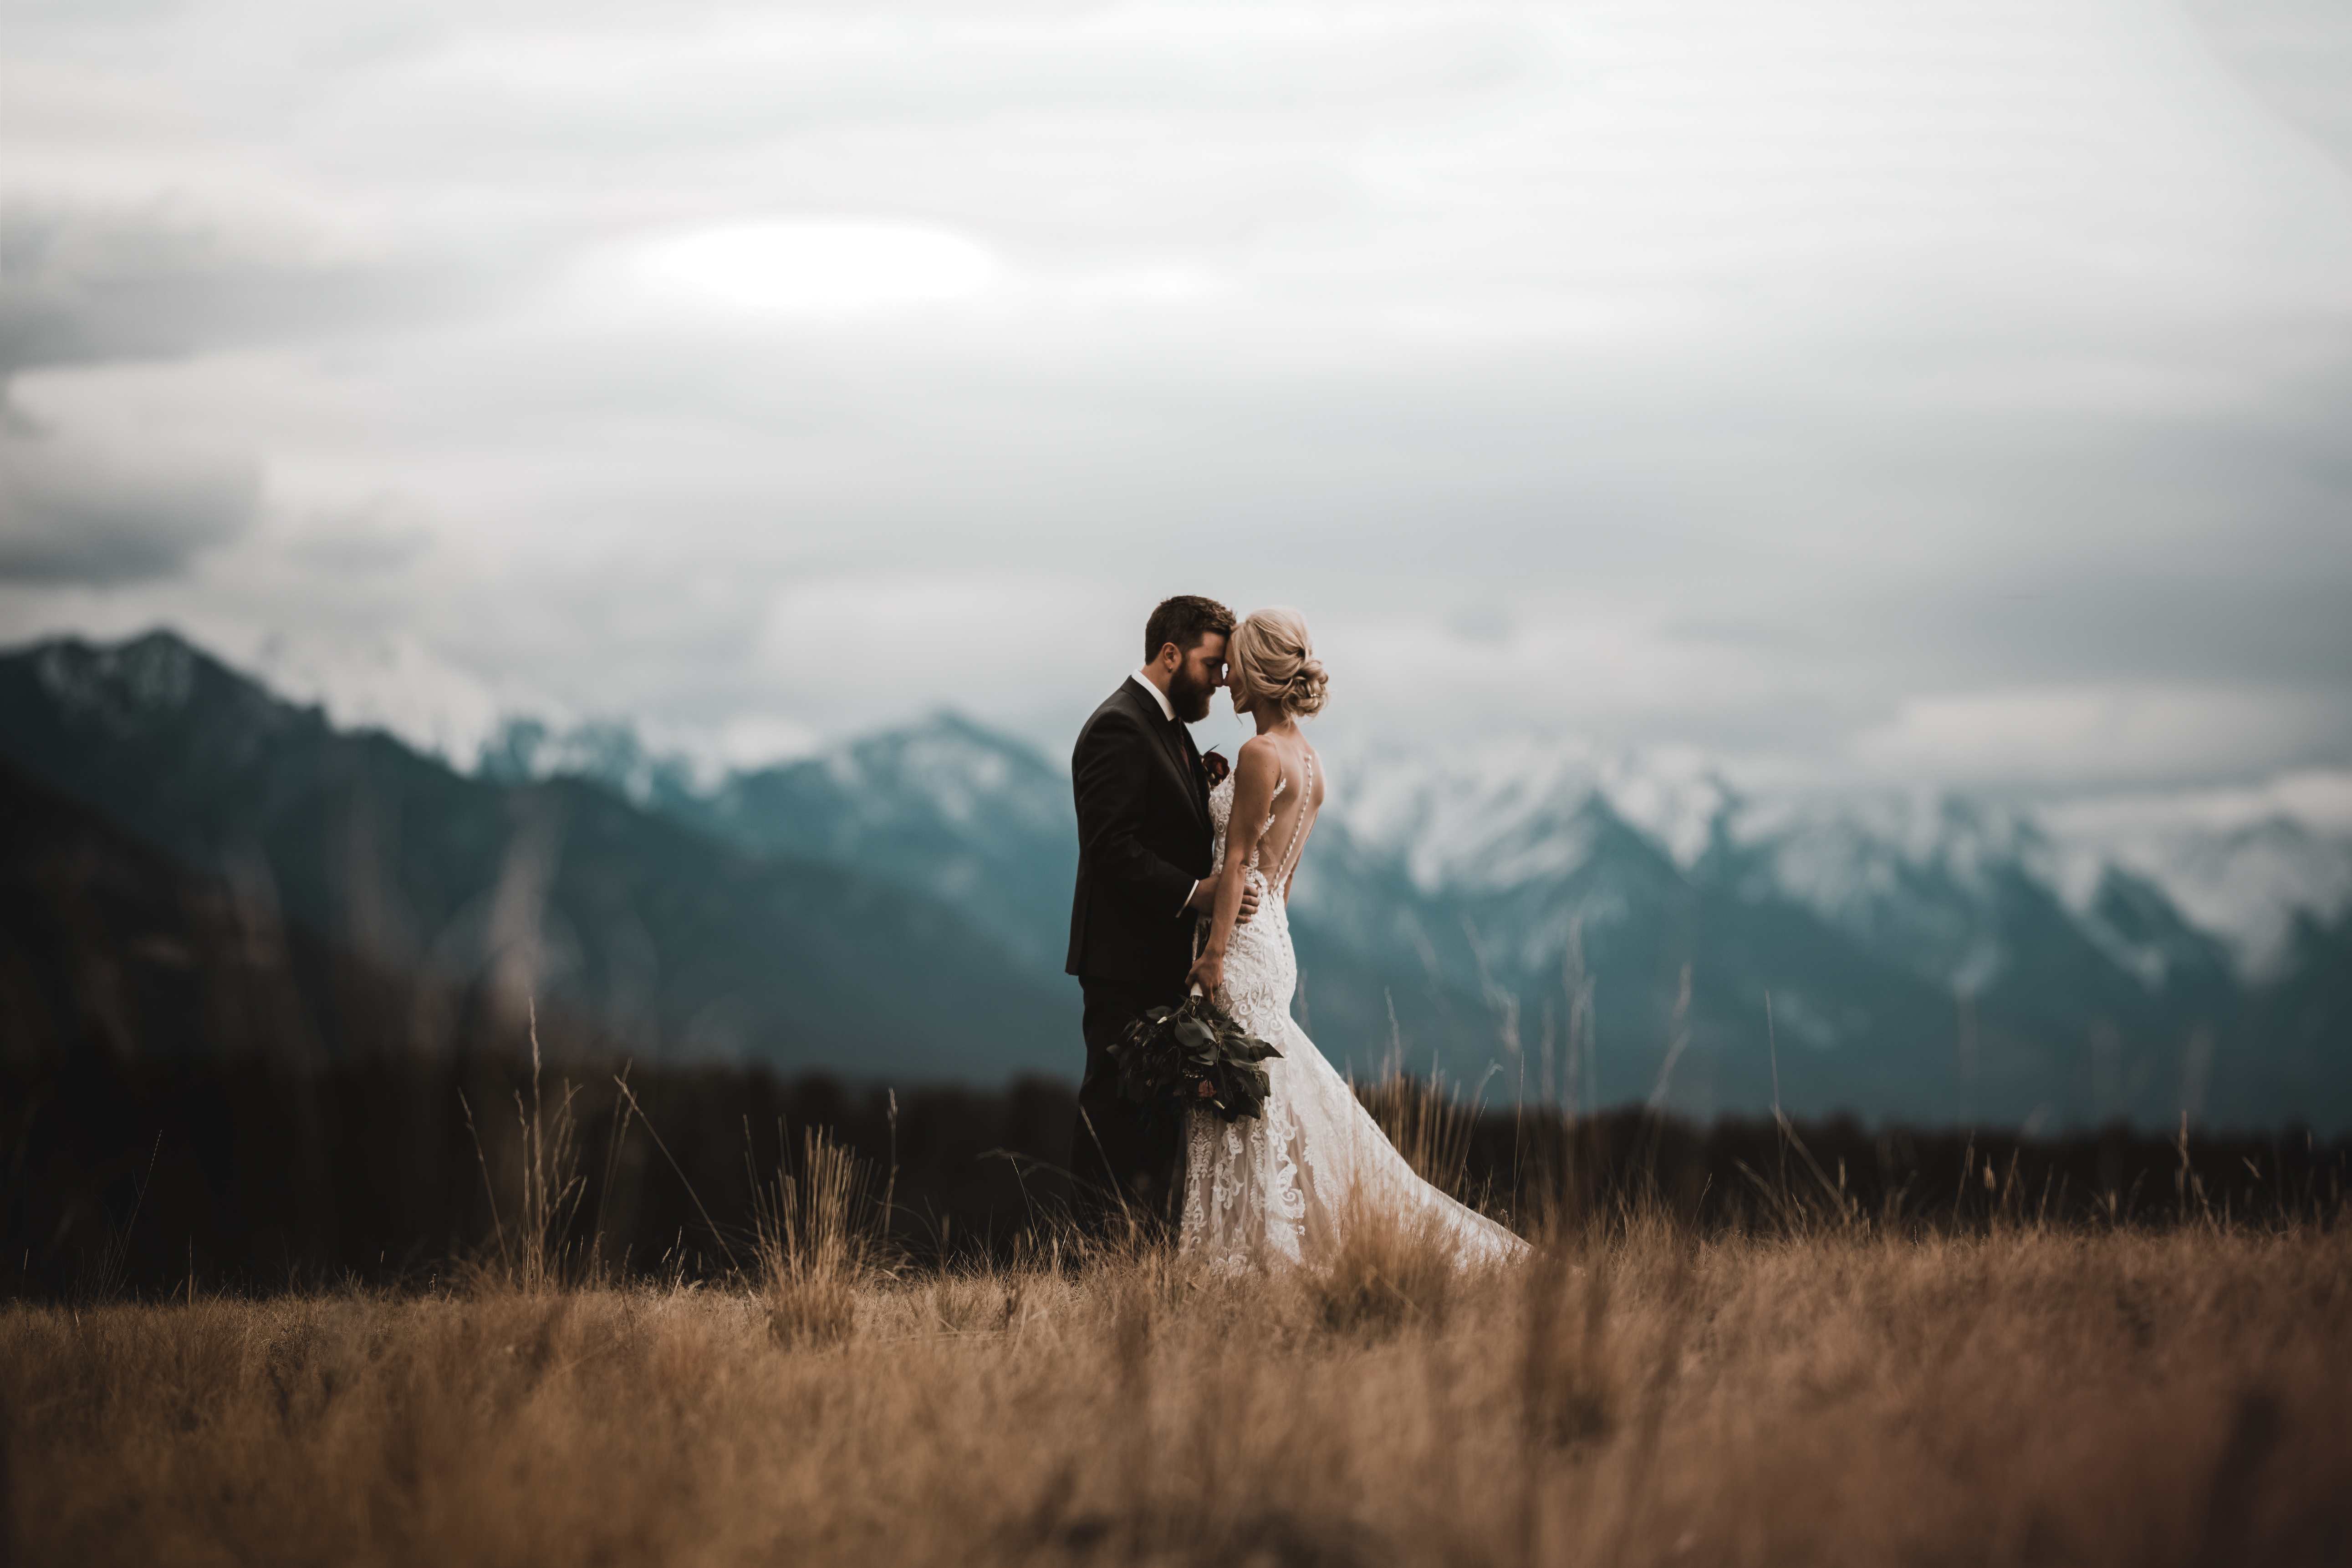 Calgary wedding photographer in Invermere for adventurous mountain destination elopement at Eagle Ranch Golf Resort, British Columbia - Featured